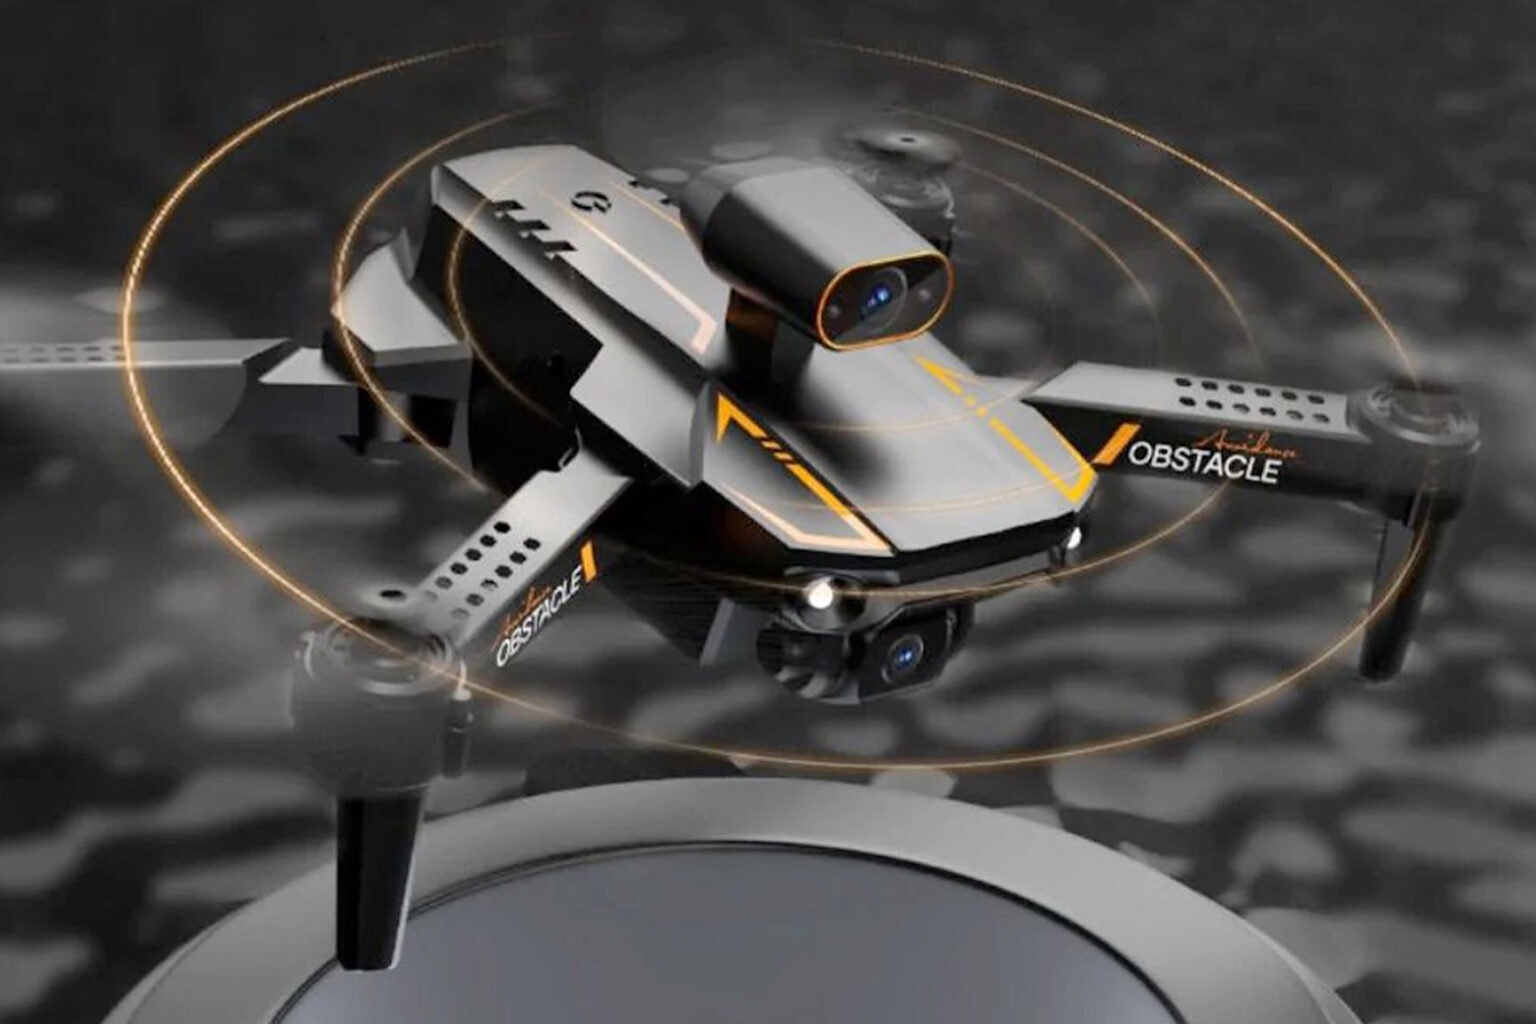 Film amazing aerial sequences with 45% off this drone.